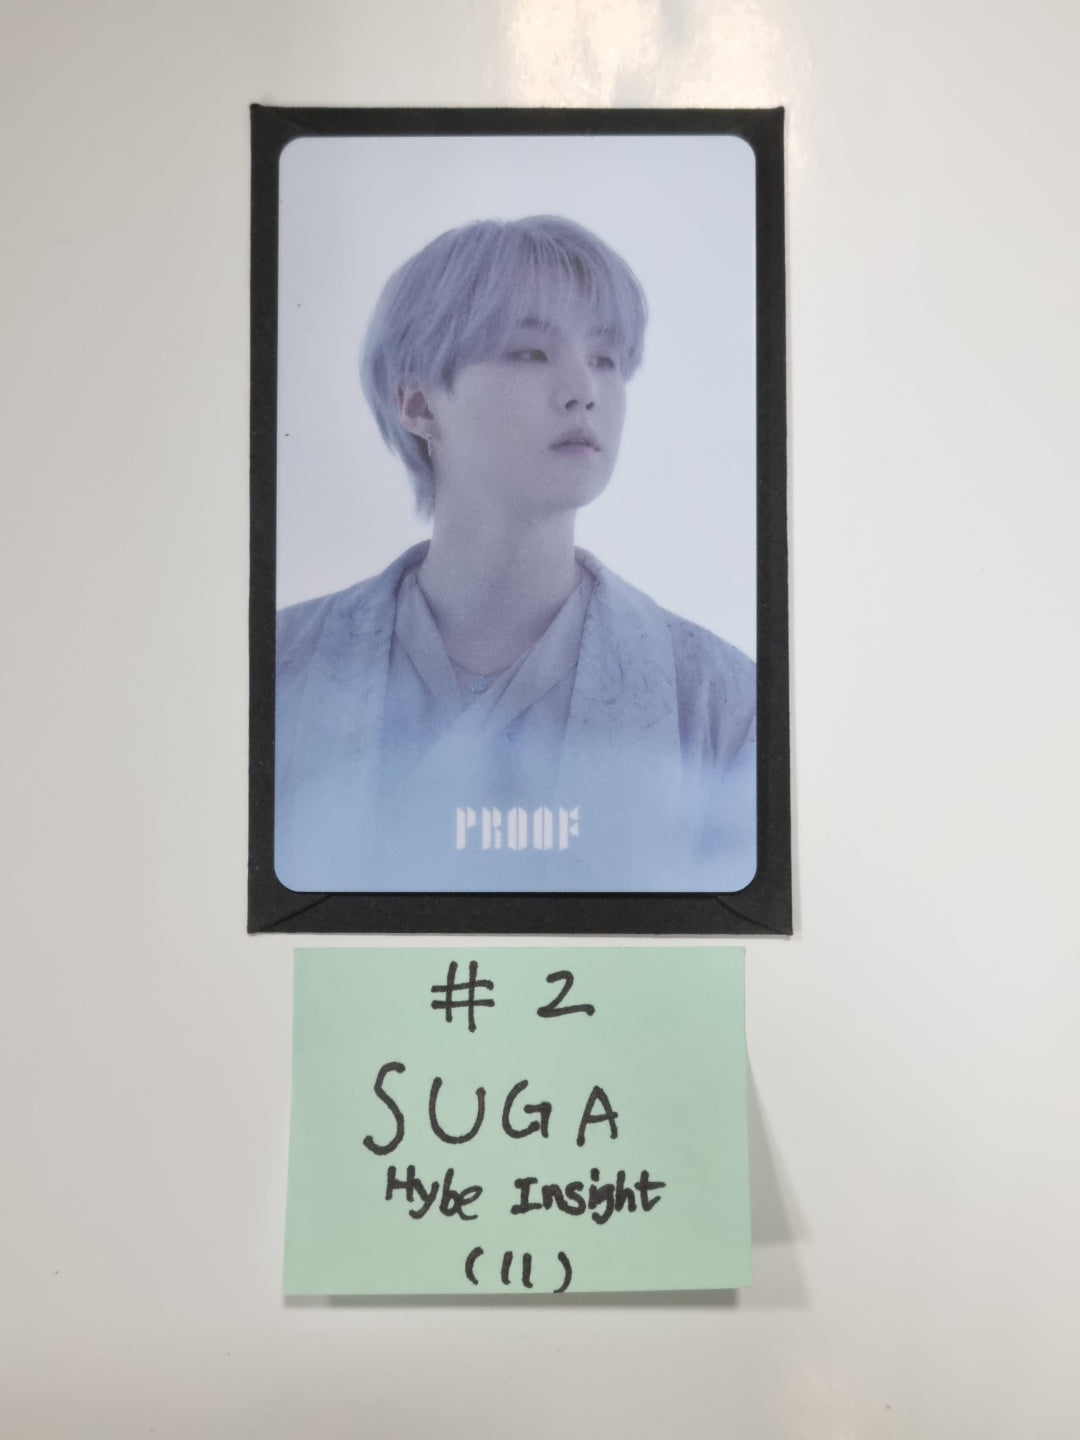 BTS "Proof" - Hybe Insight Event PVC Photocard ( Restocked 8/3 )